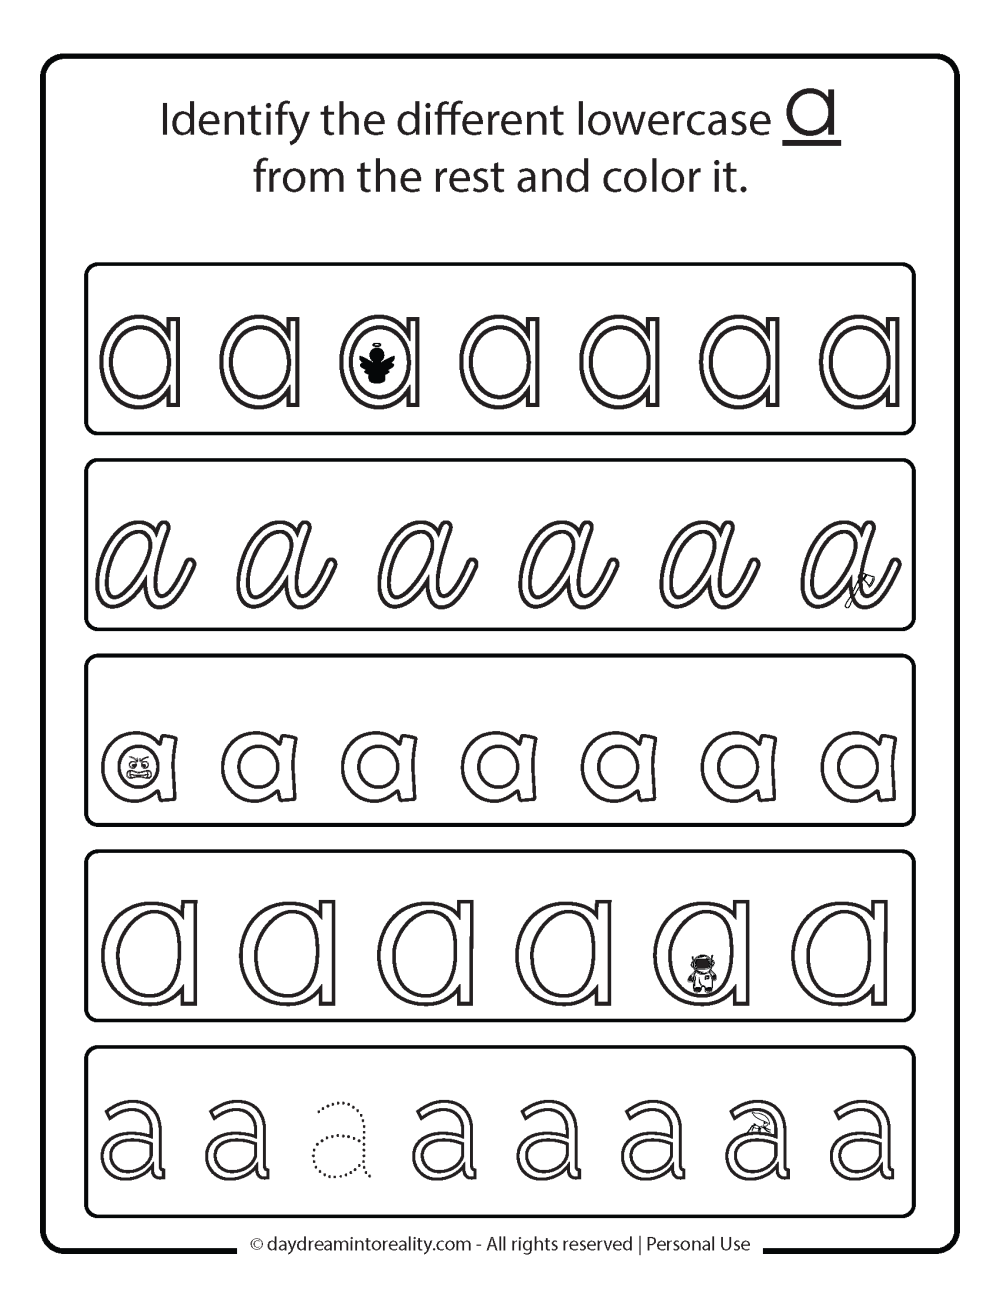 Identify different lowercase a letter worksheet free printable